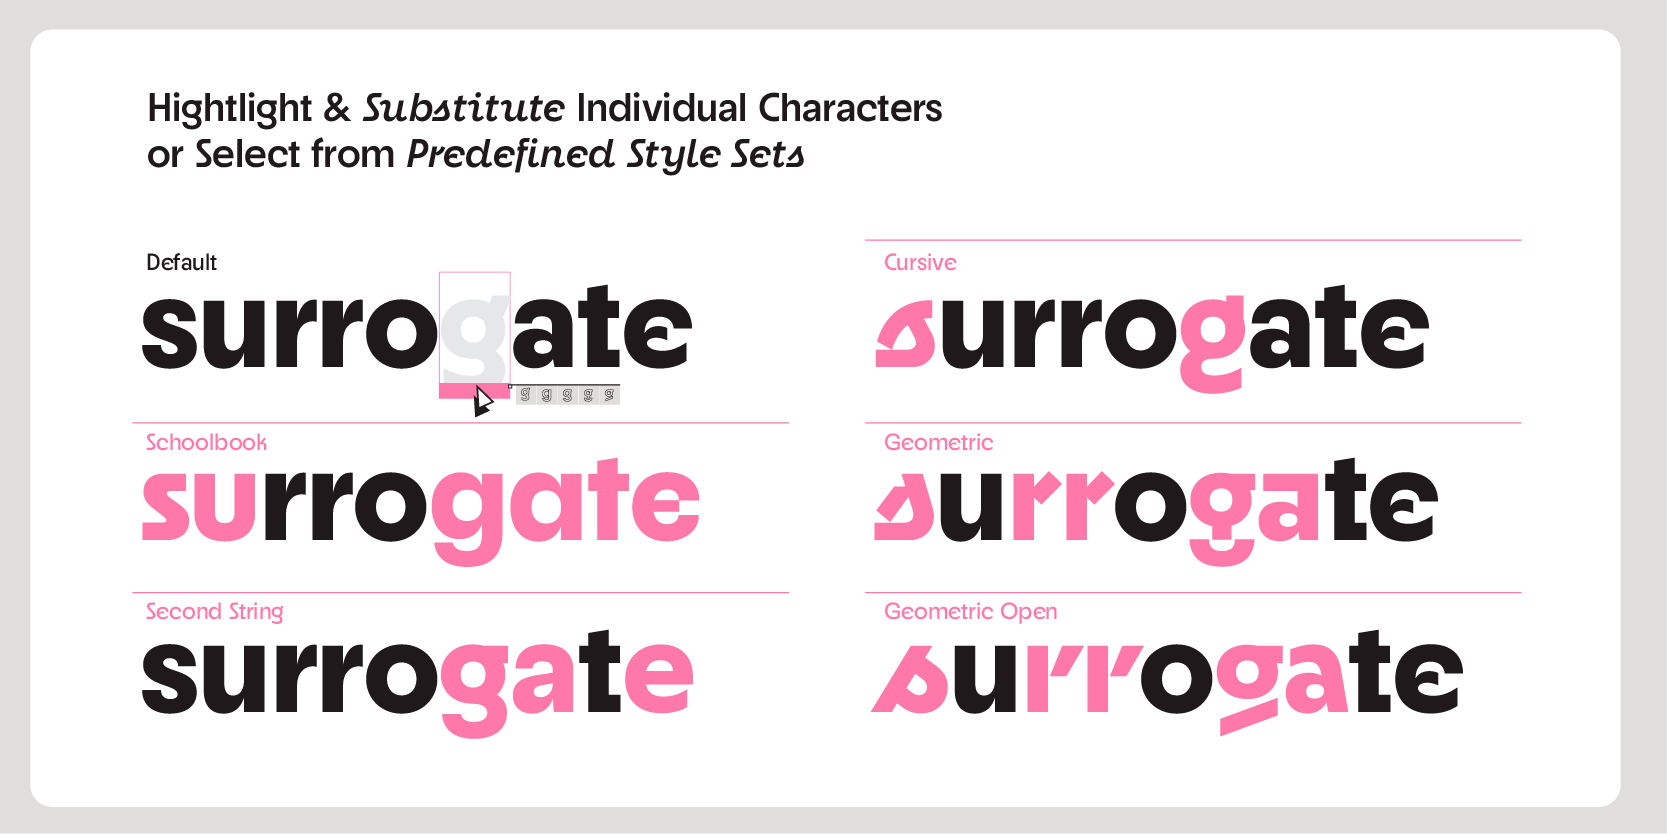 Card displaying Neighbor typeface in various styles